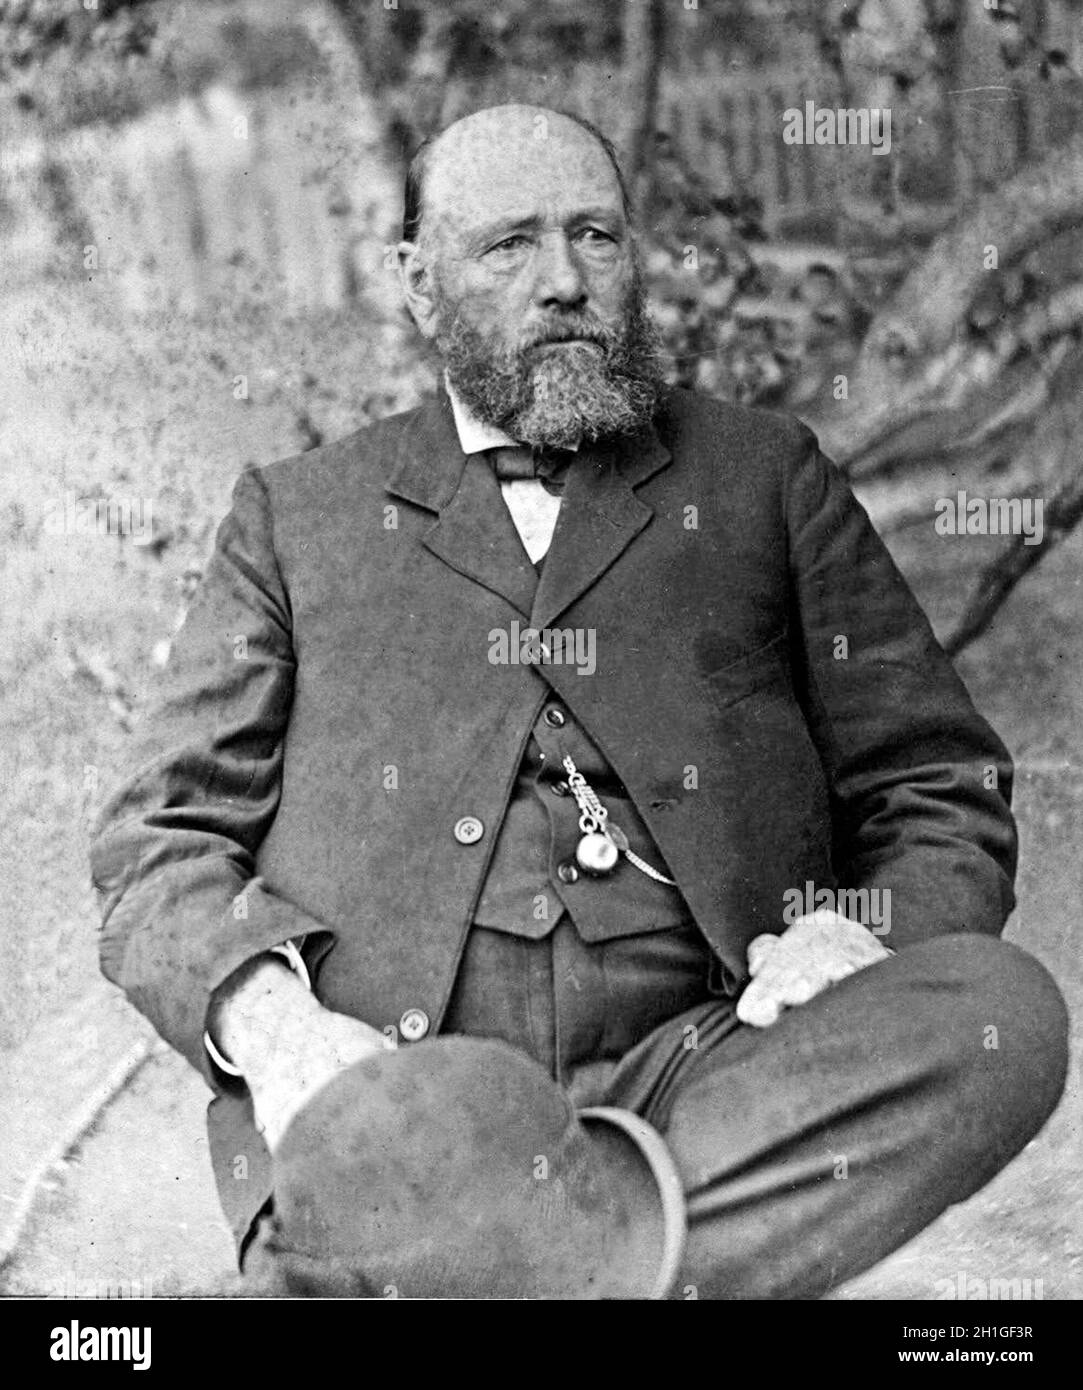 General Piet Cronjé (1836-1911), veteran general of the army of the South African Republic during the Second Boer War, taken prisoner by the British when he surrendered after losing the battle of Paardeberg on 27 February 1900. The photograph shows Cronjé as prisoner of war on Saint Helena where he remained until the conclusion of the war on 31 May 1902. Stock Photo